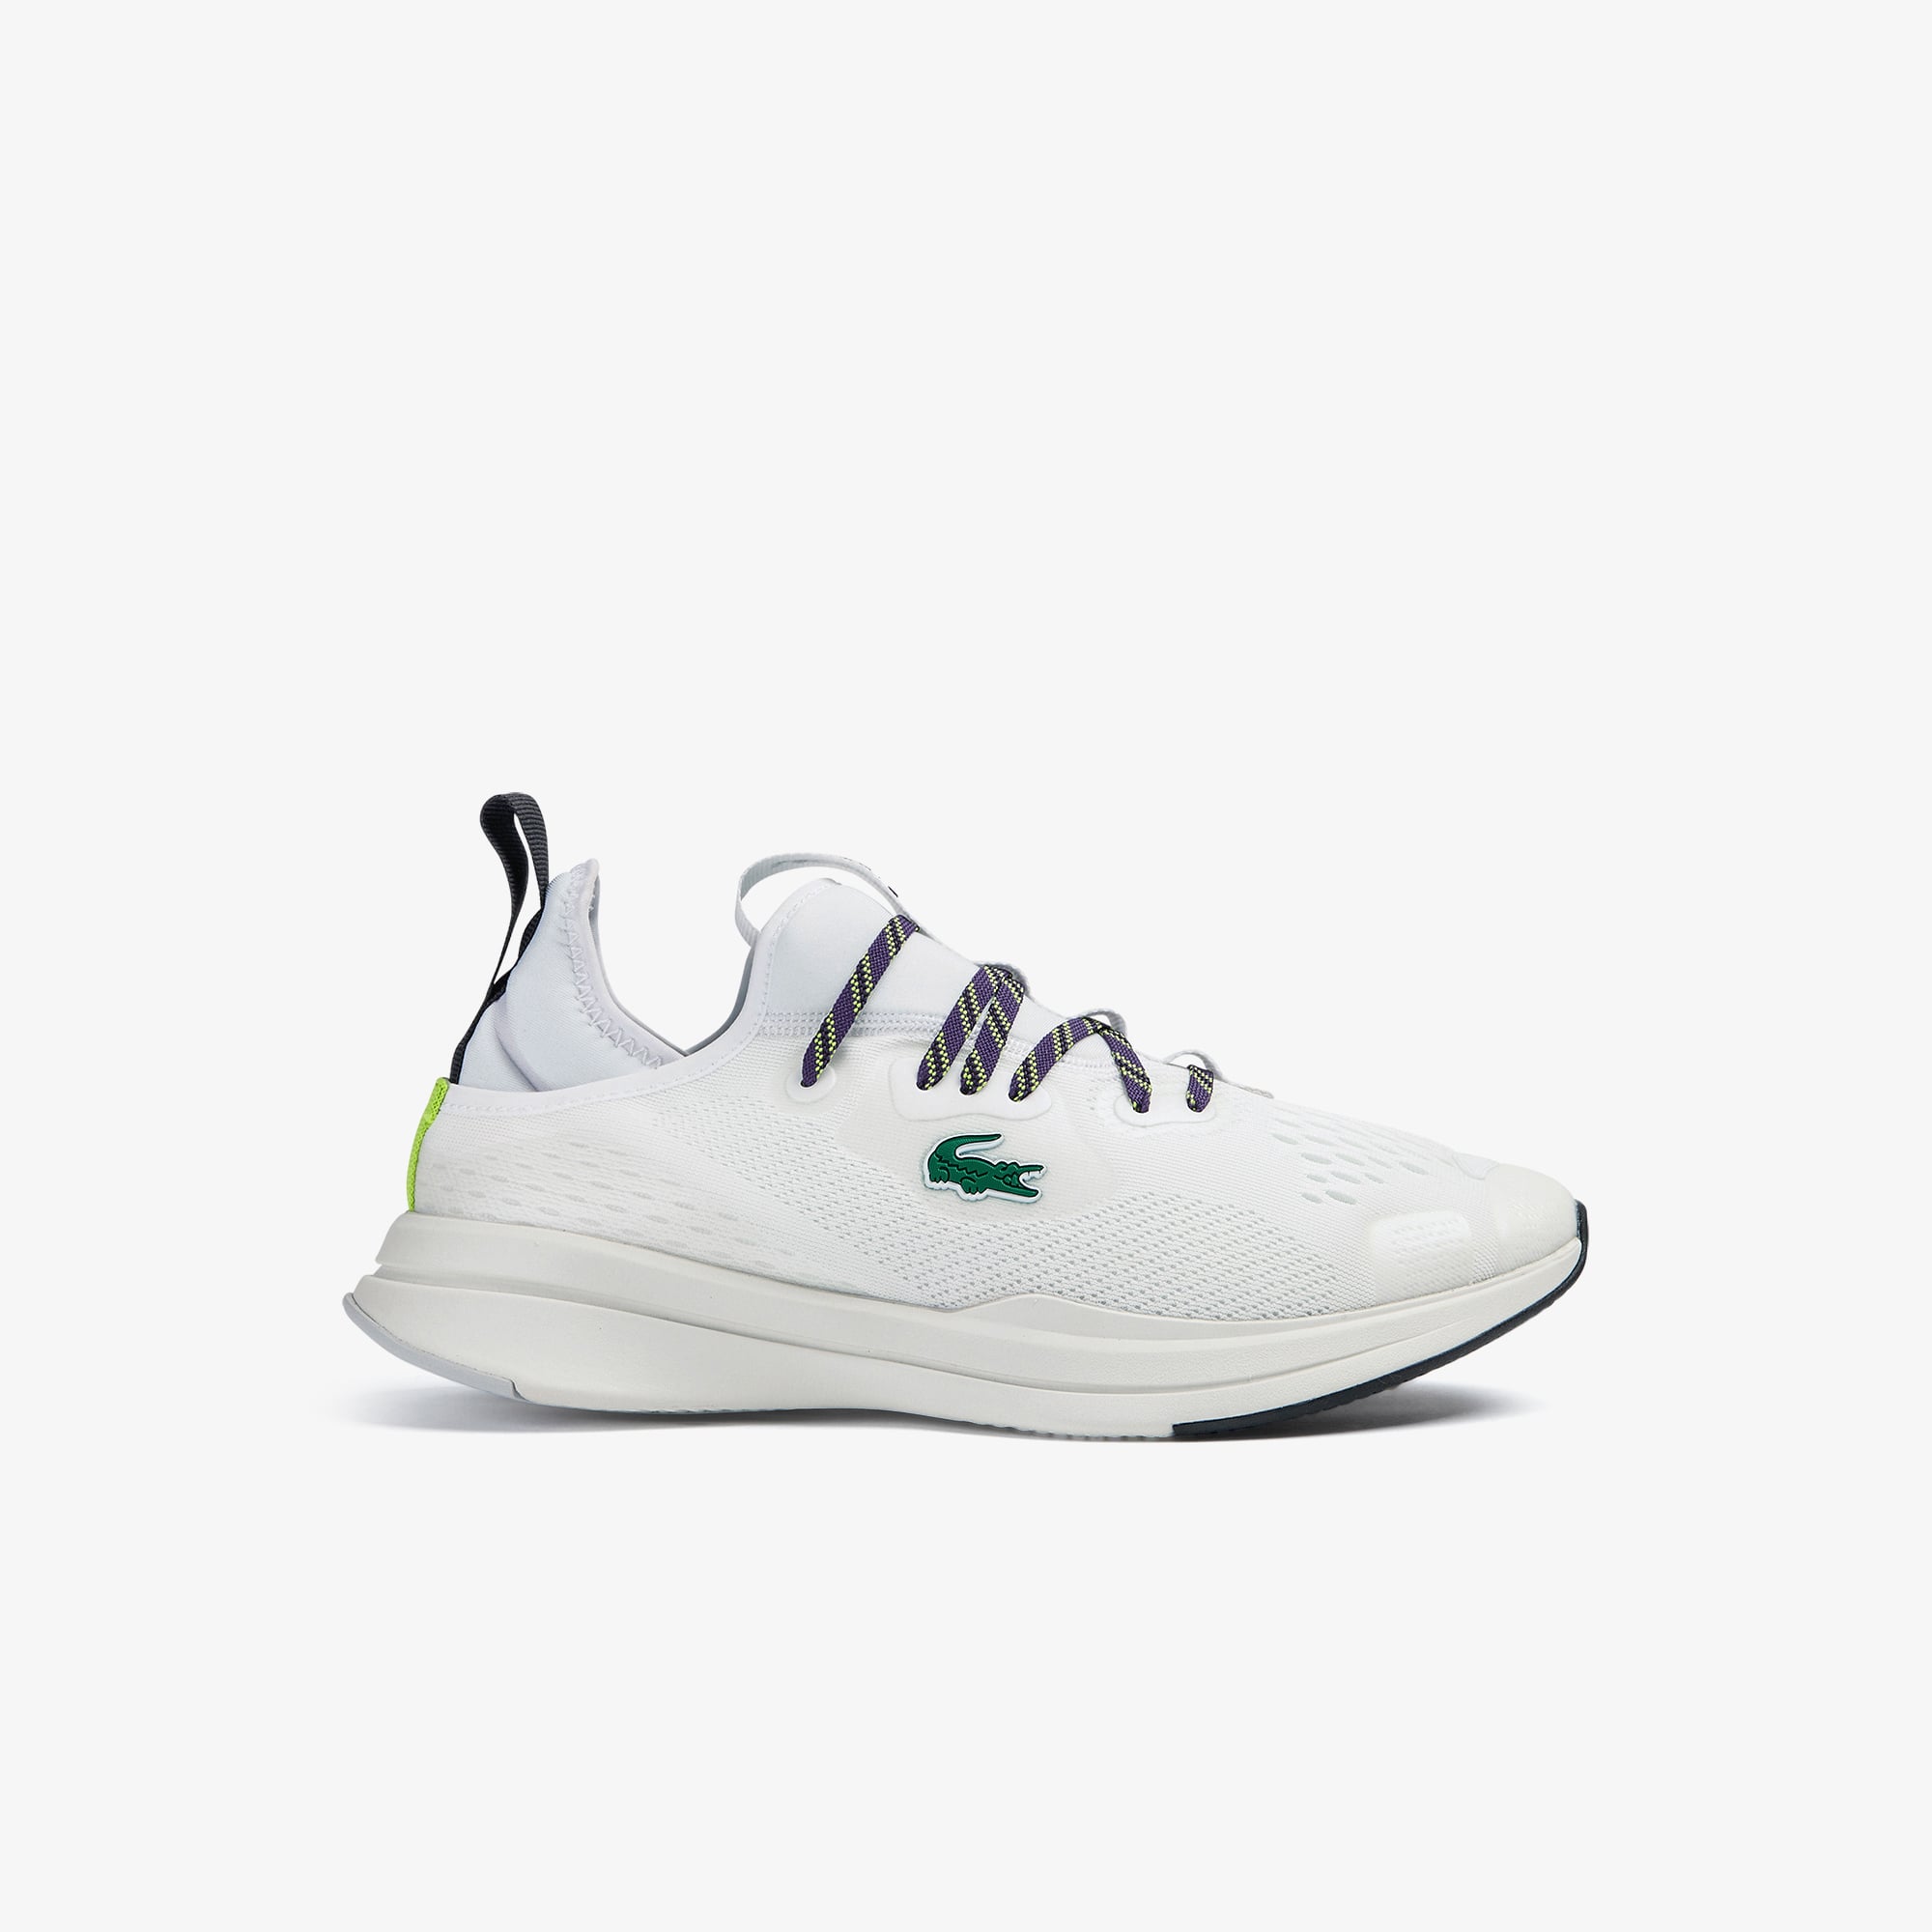 Mens Lacoste Run Spin Comfort Textile Sneakers